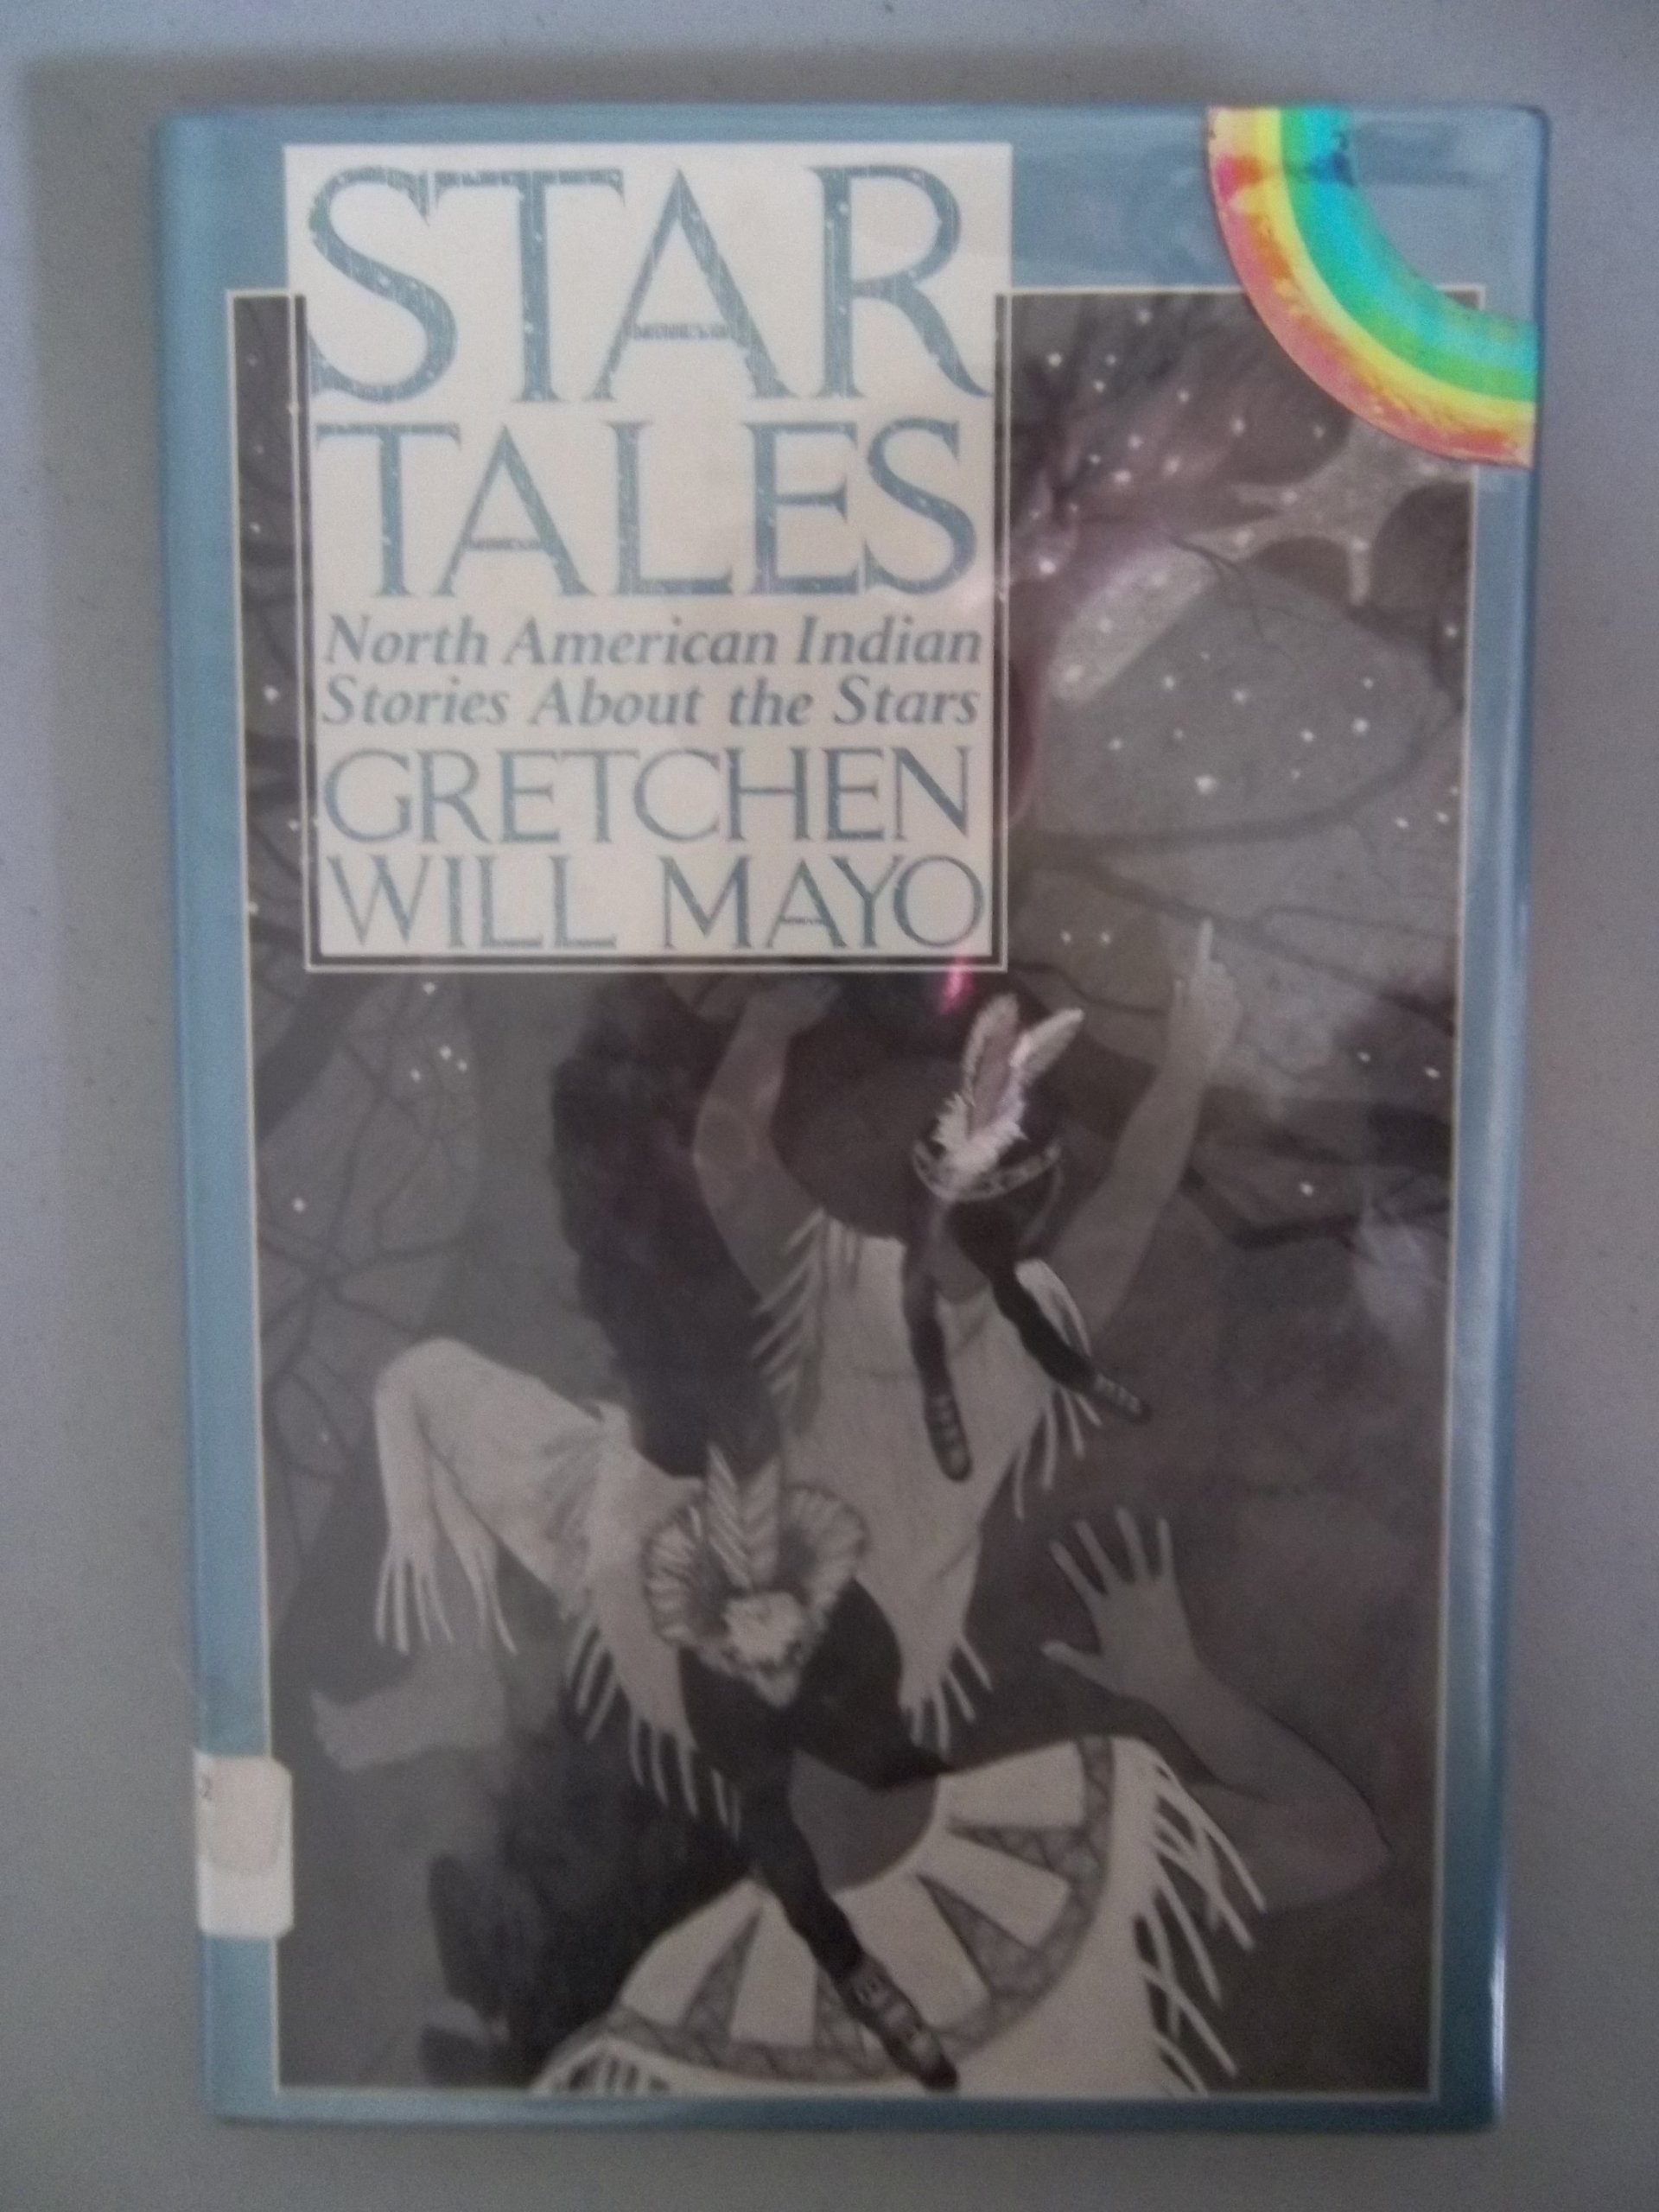 Star tales (book cover)